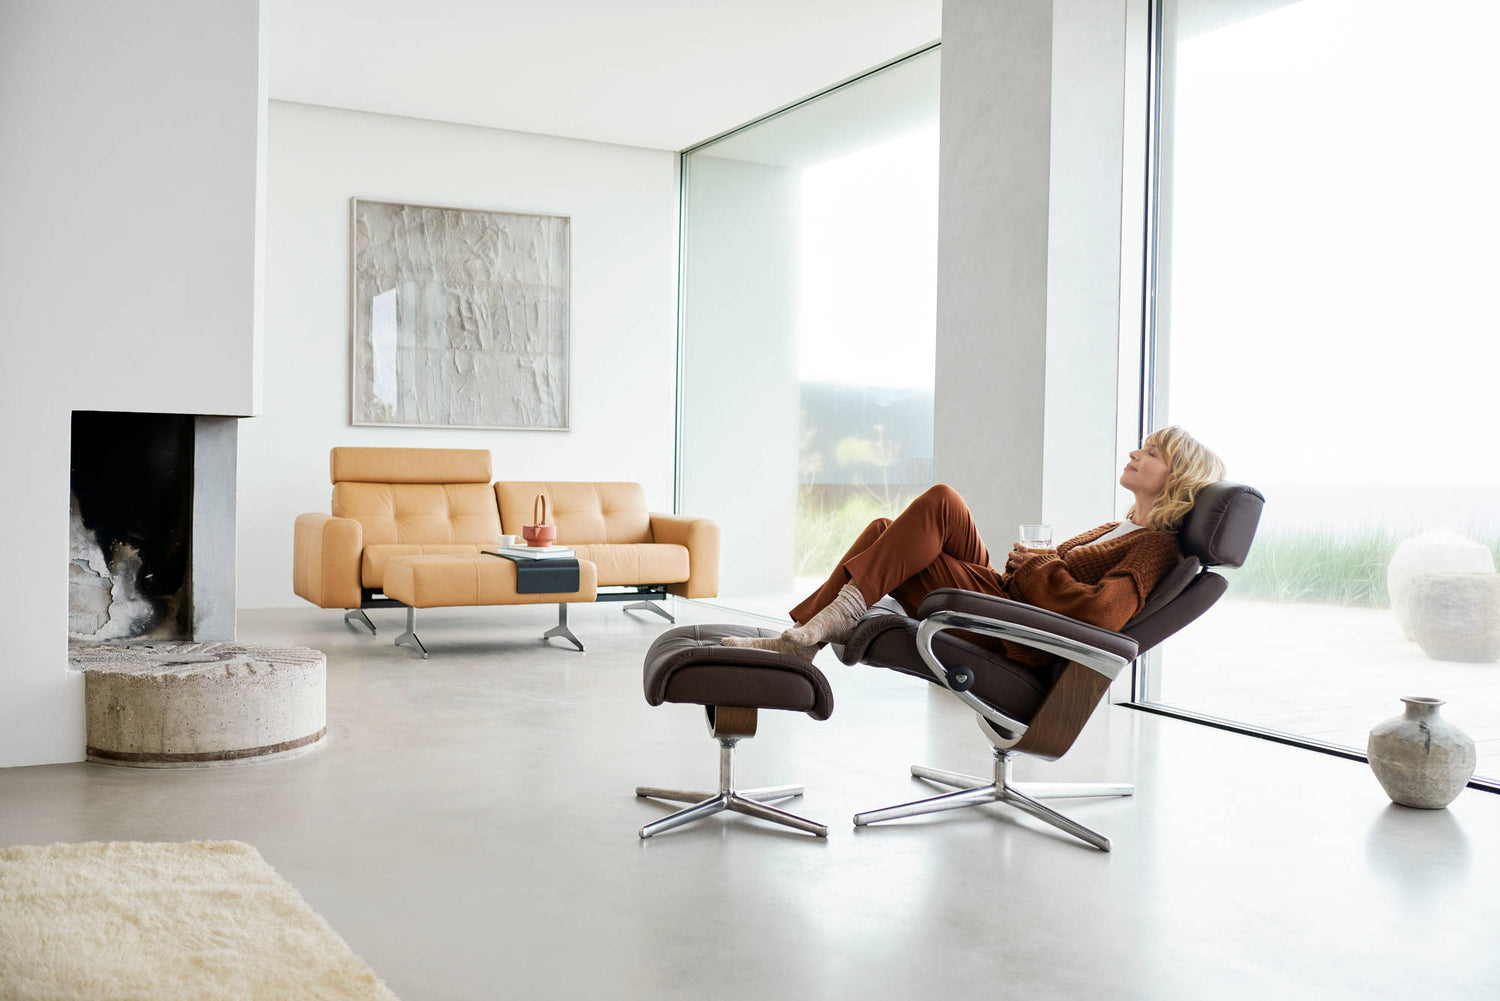 Wallingford has a Stressless Dealer The World's Best Recliners & Sofas